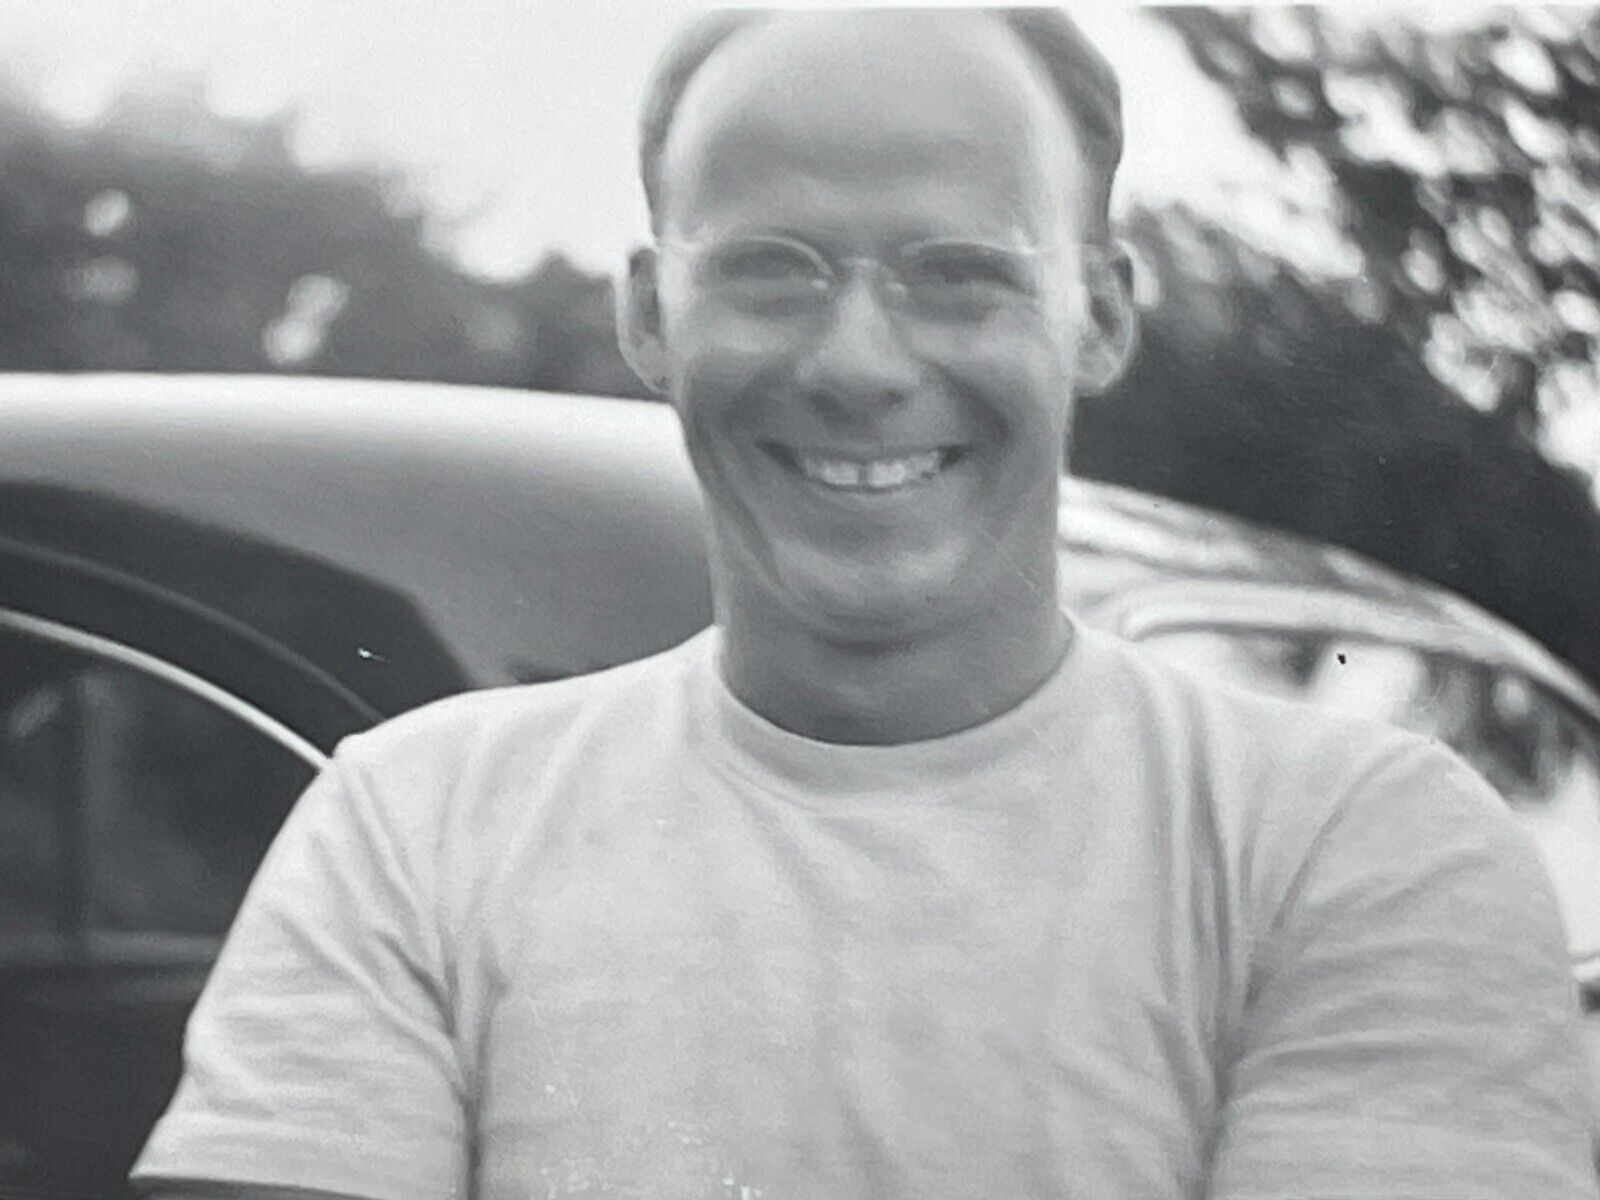 LC Photograph Handsome Man Balding Glasses Smiling Happy Old Car 1940-50's